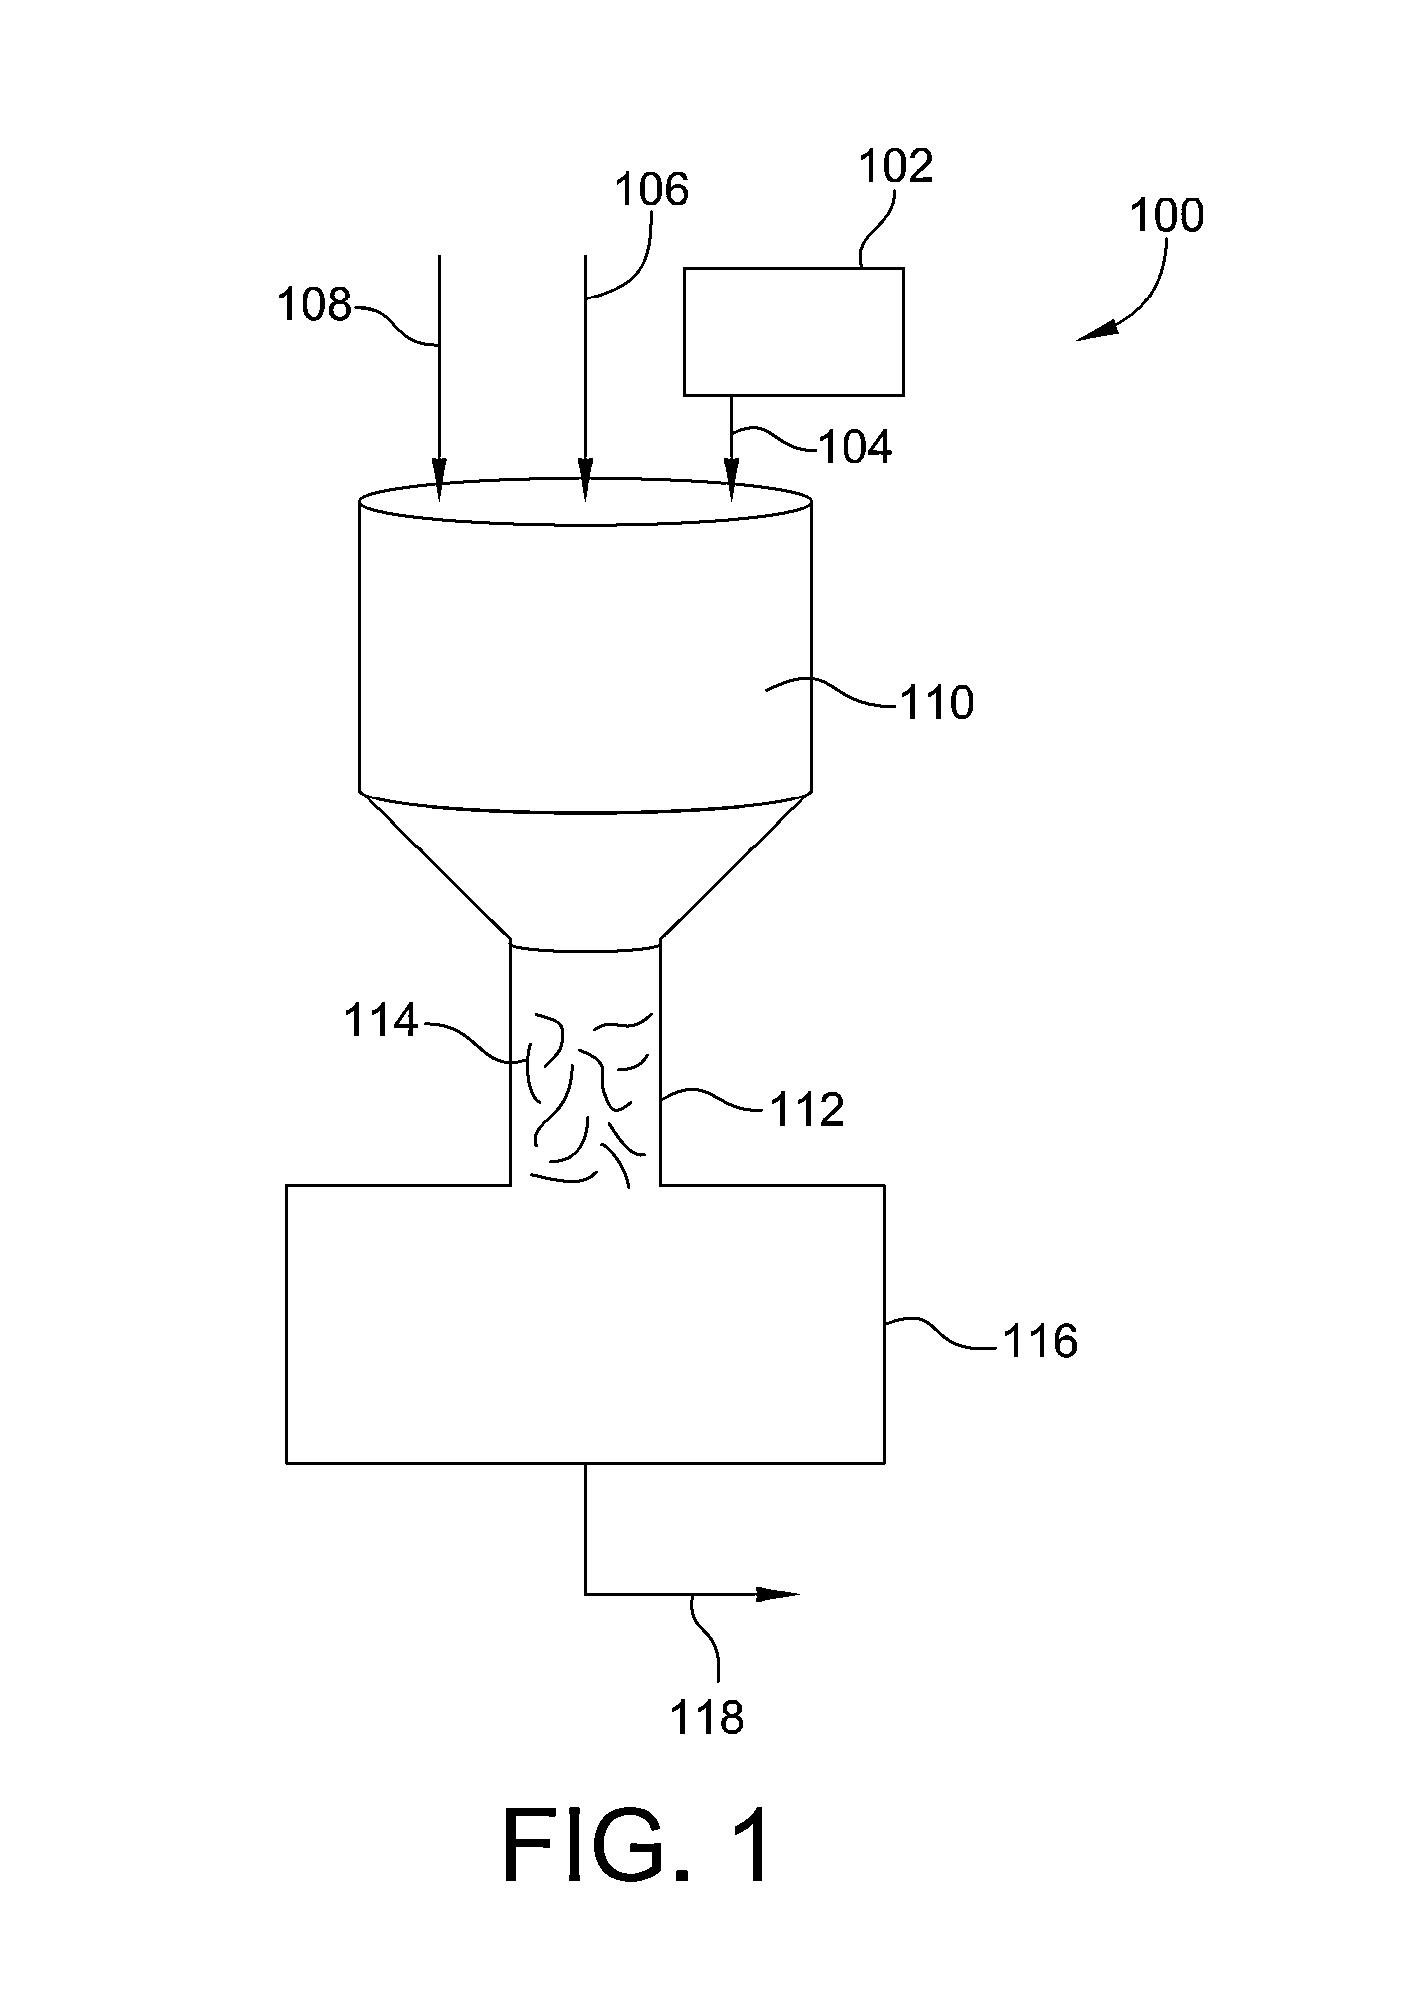 Process and system for removing urea from an aqueous solution